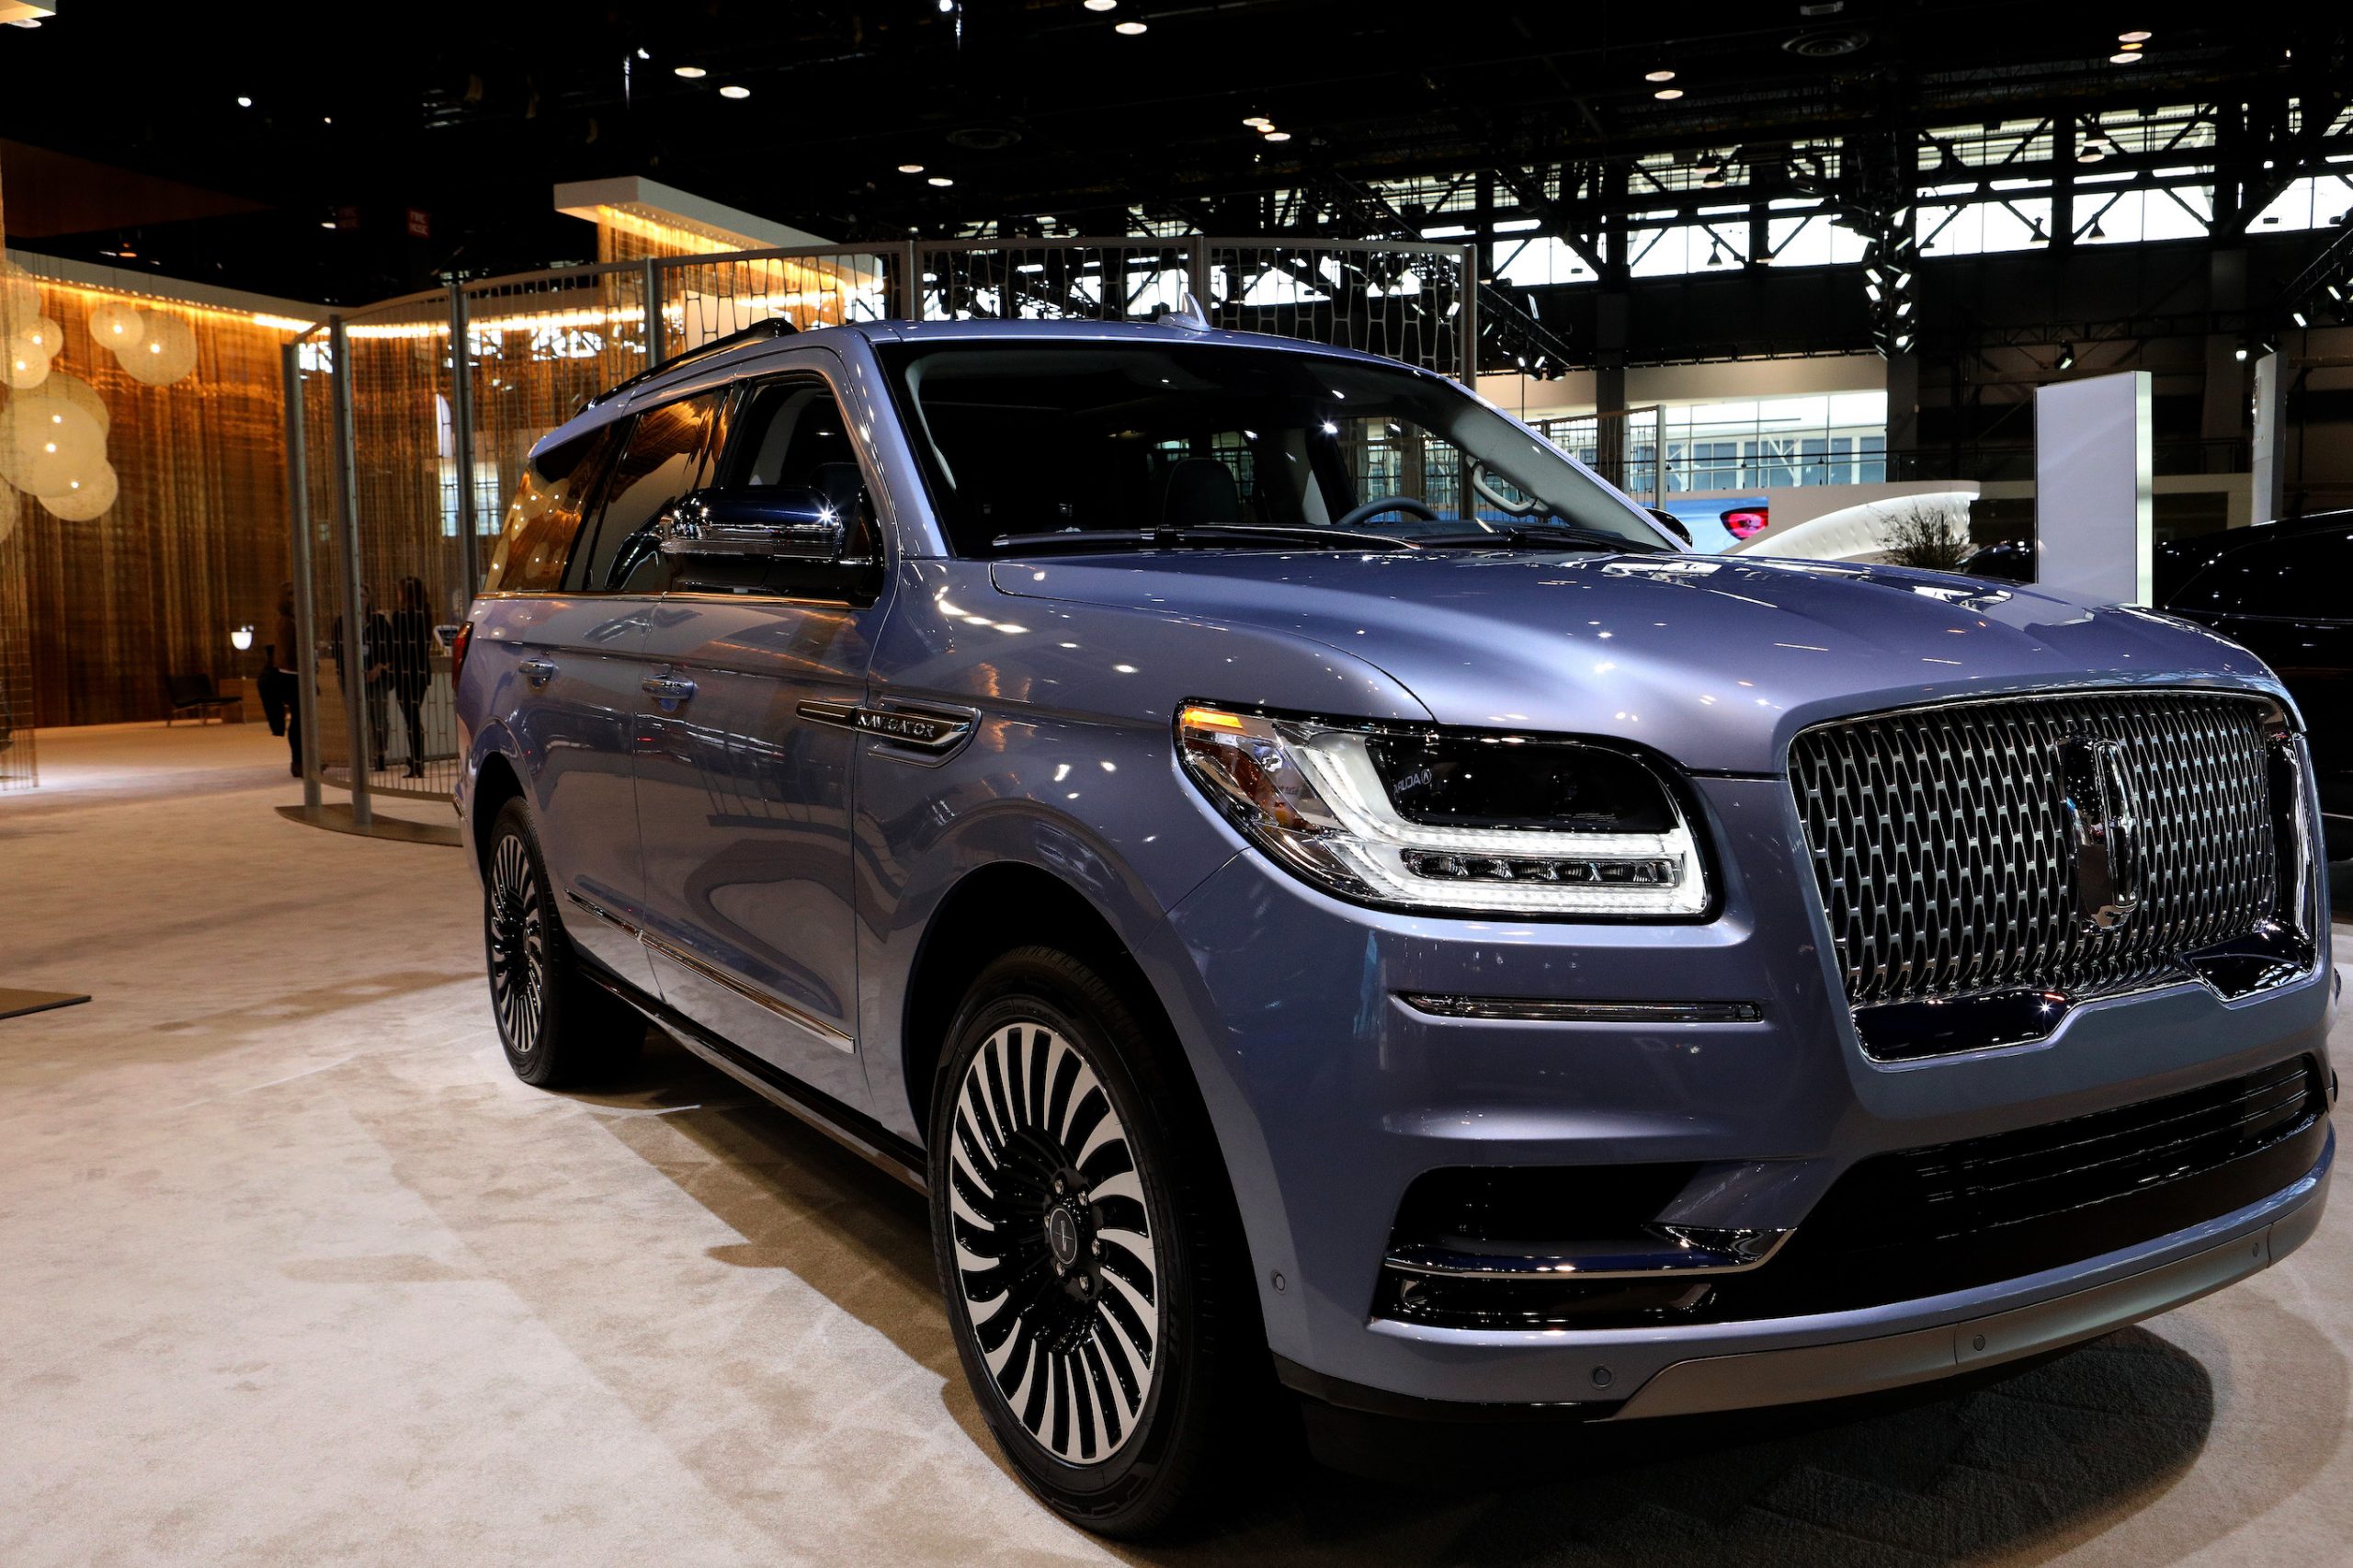 Gray 2020 Lincoln Navigator is on display at the 112th Annual Chicago Auto Show at McCormick Place